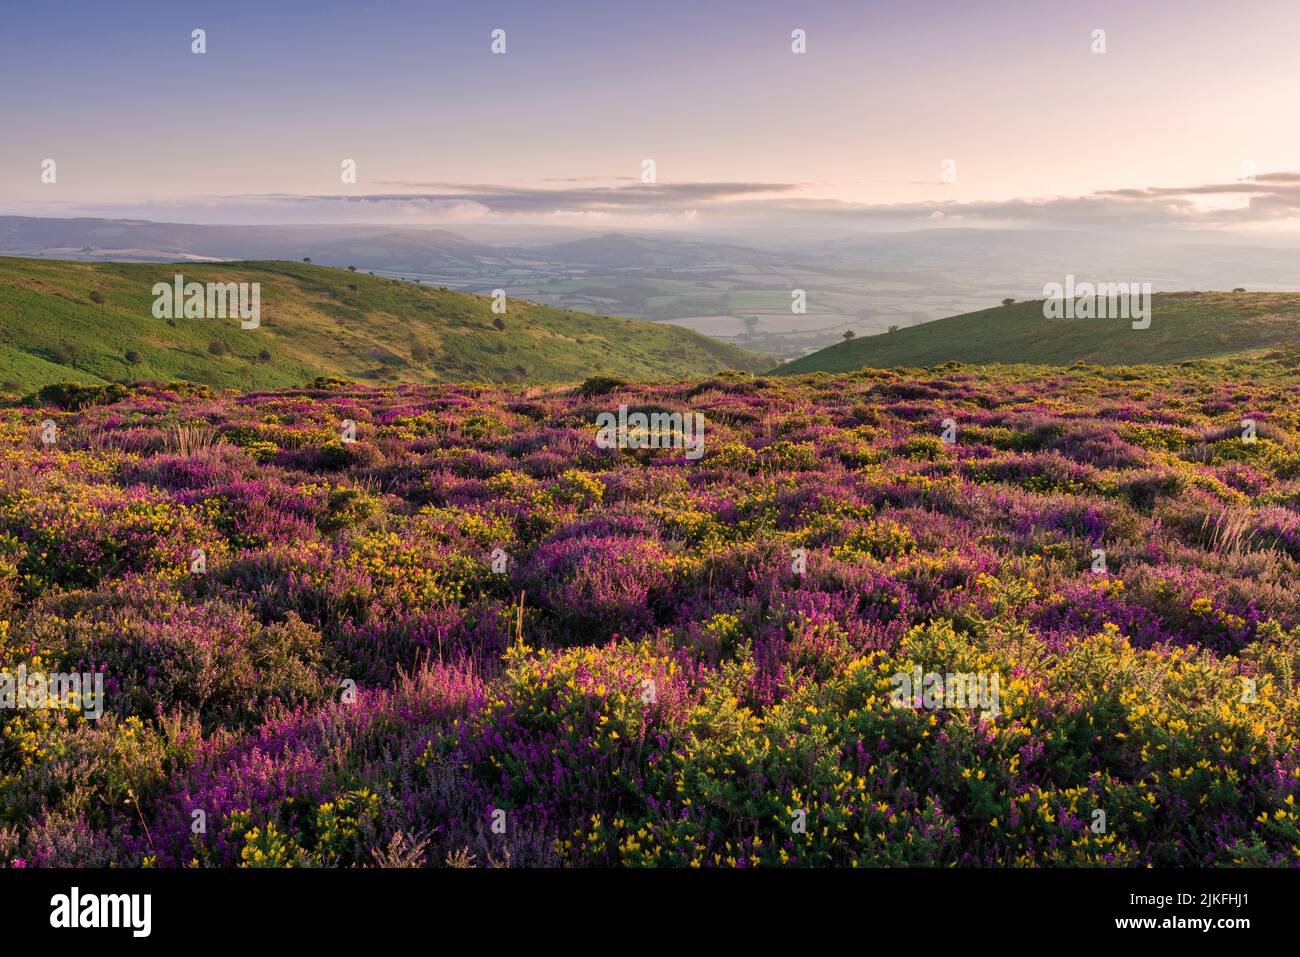 Heather and Gorse on Weacombe Hill above Bicknoller Combe in the Quantock Hills, Somerset, England. Stock Photo